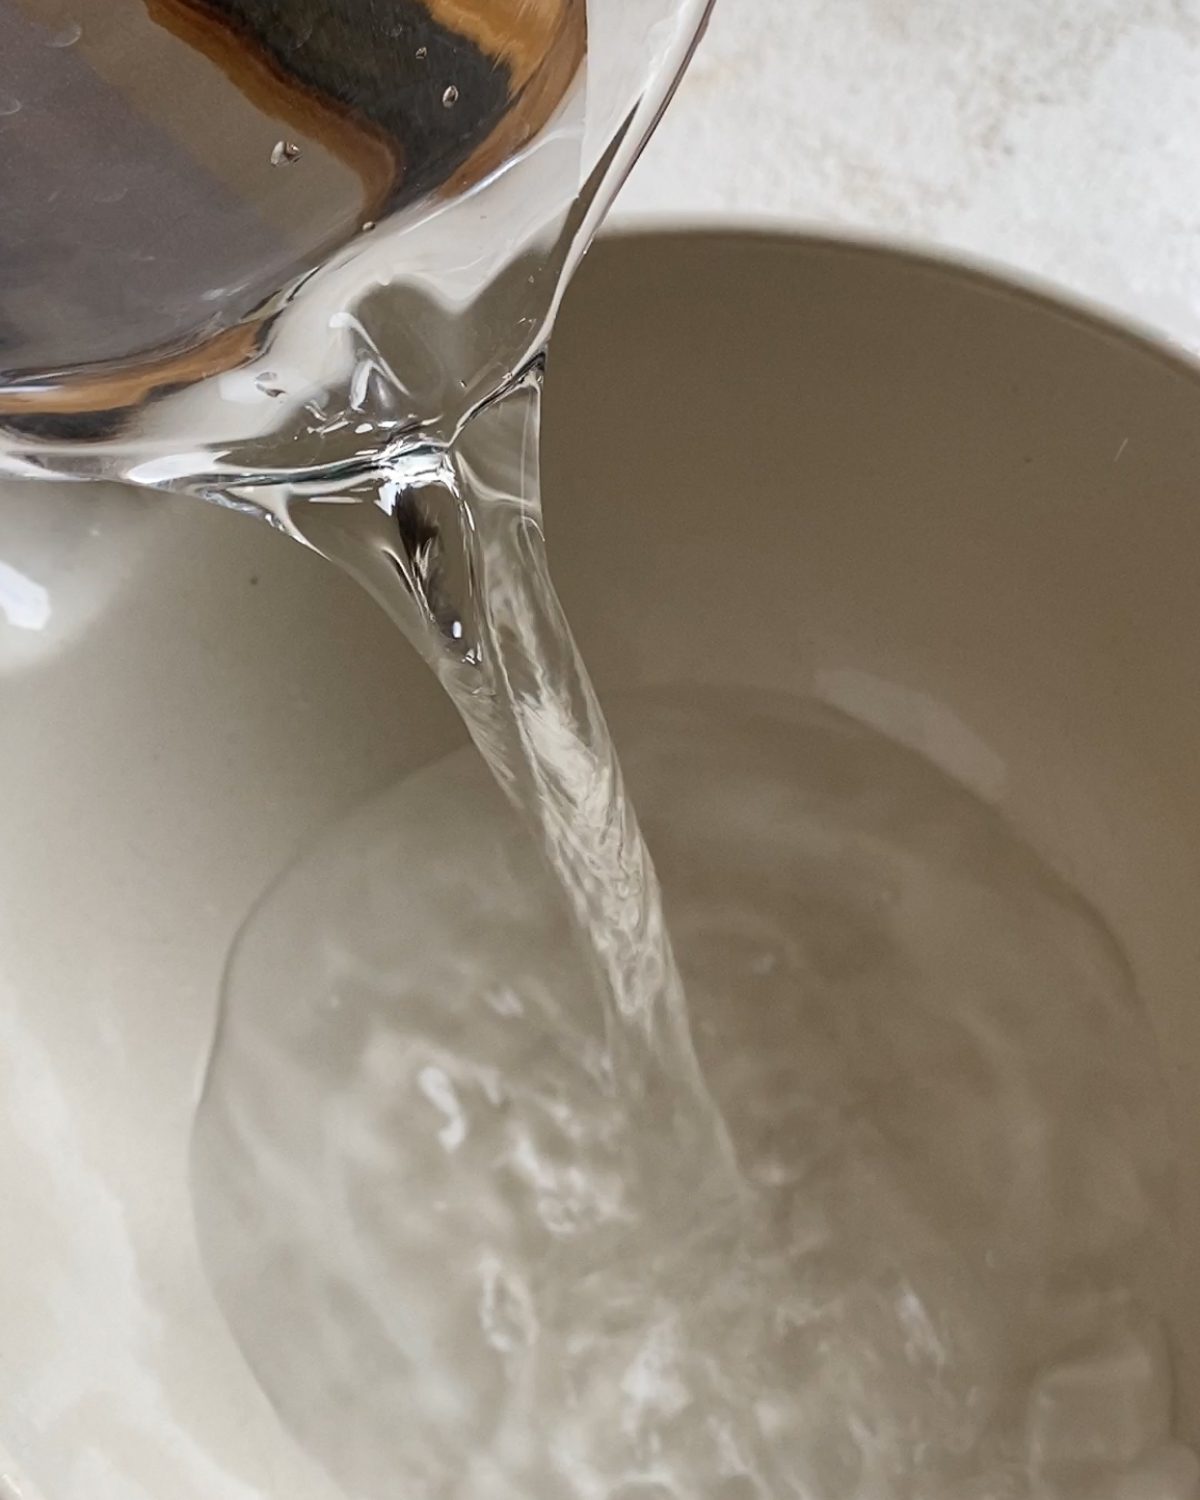 process of pouring warm water into a bowl